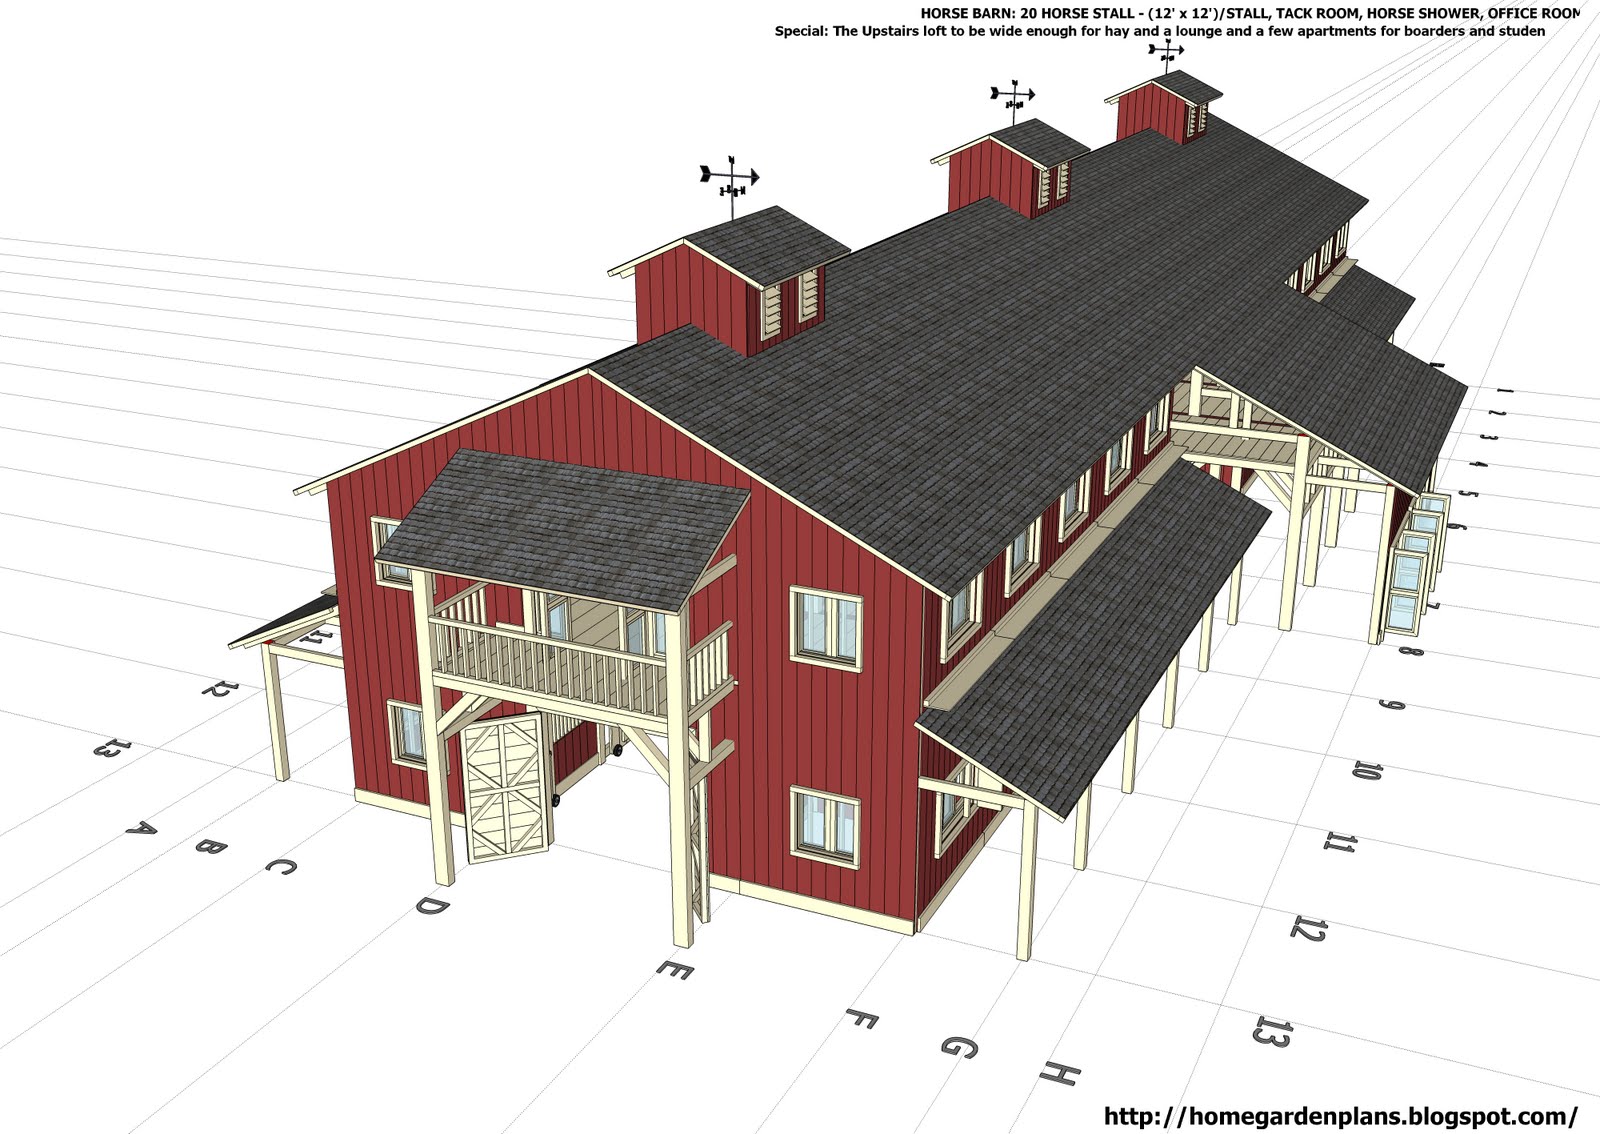  Stall Horse Barn Plans - Large Horse Barn Plans - How To Build A Horse